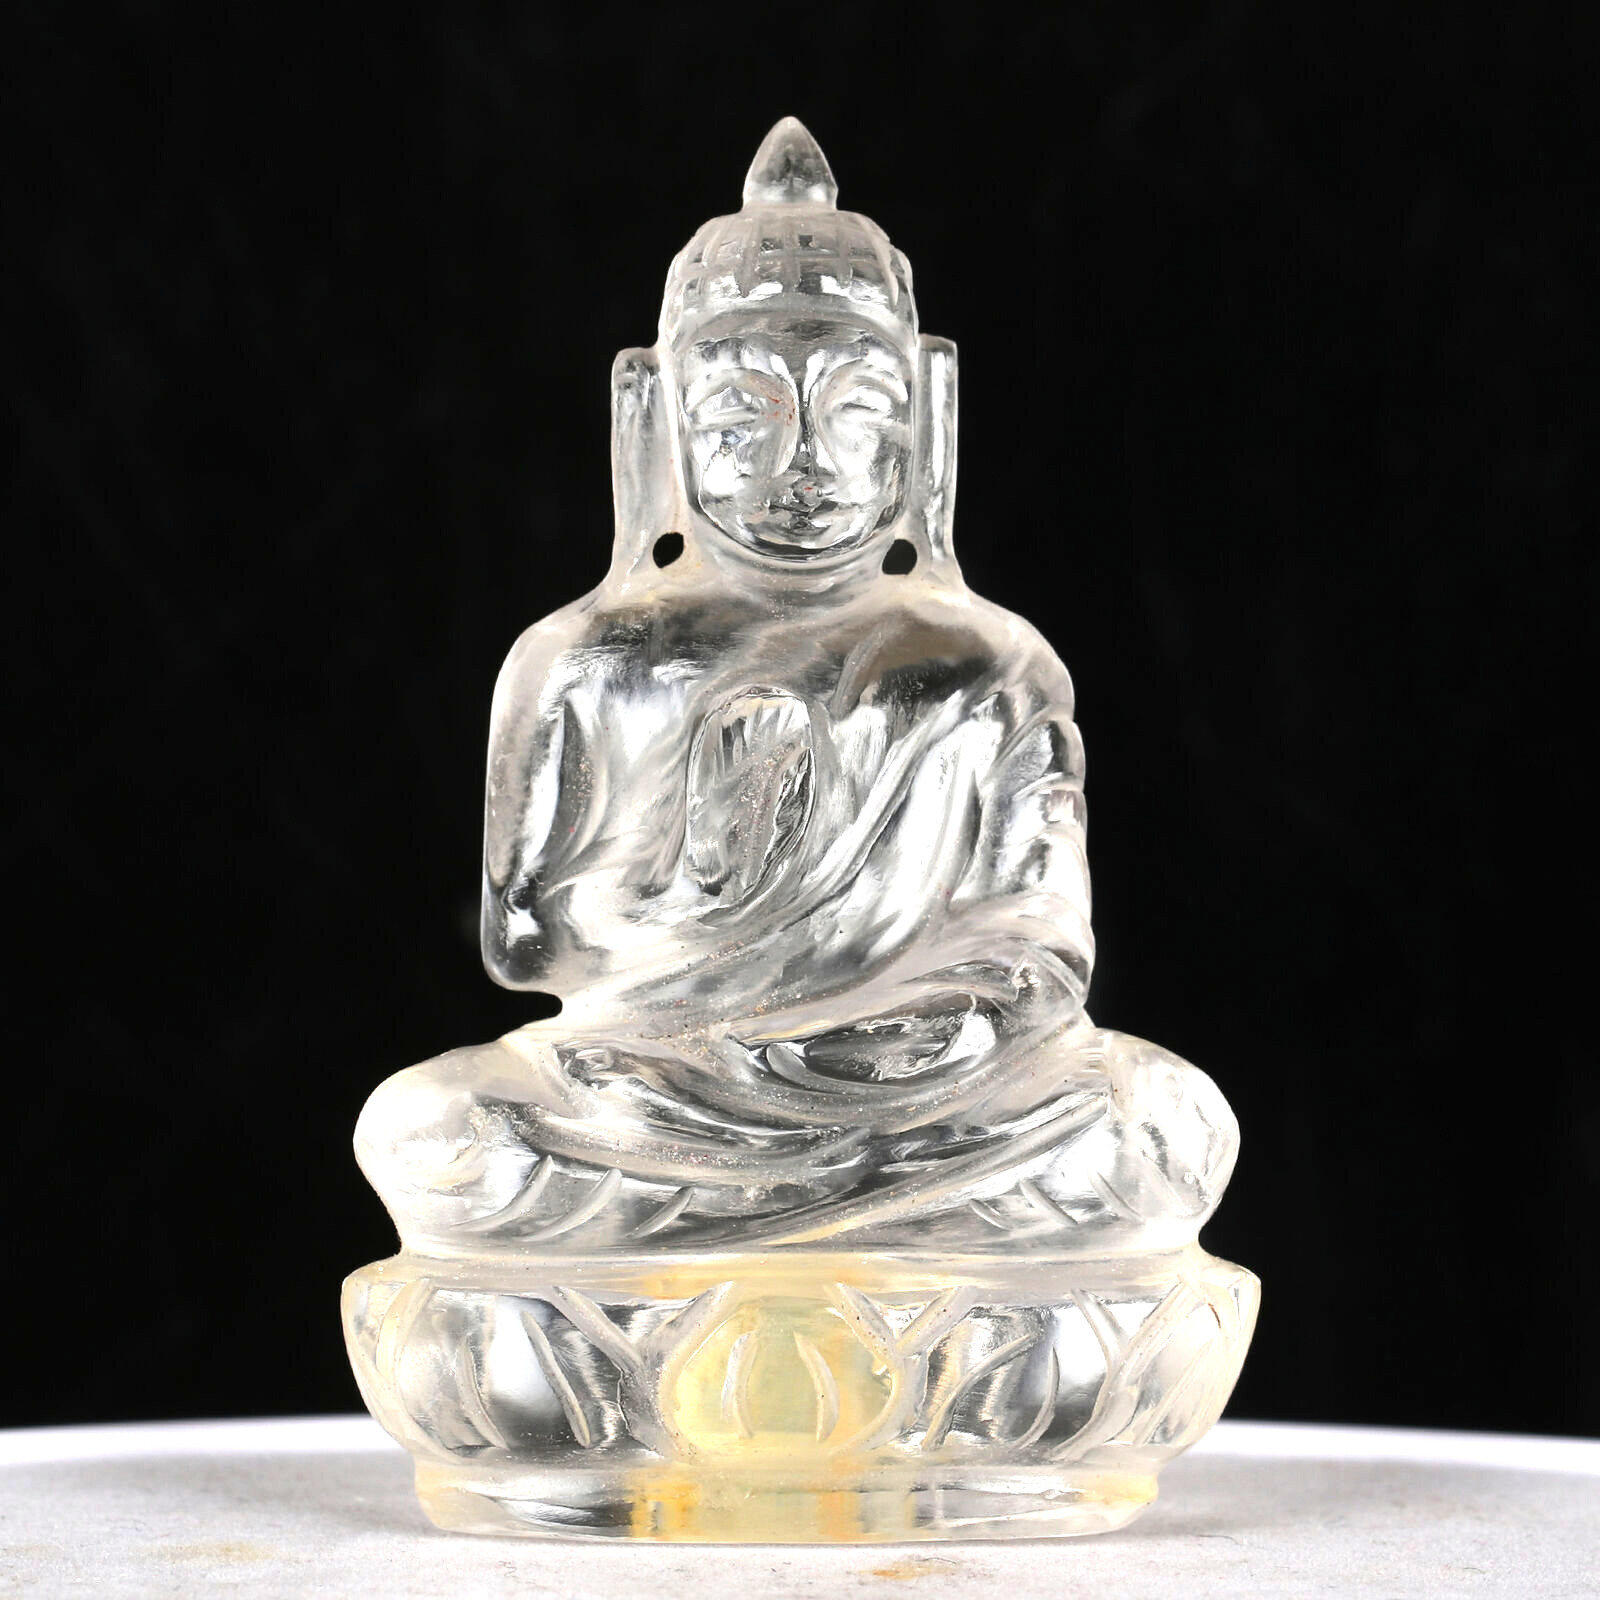 699.00 Ct - Genuine White Quartz Hand carved Buddha Statue for Gifting to Loved